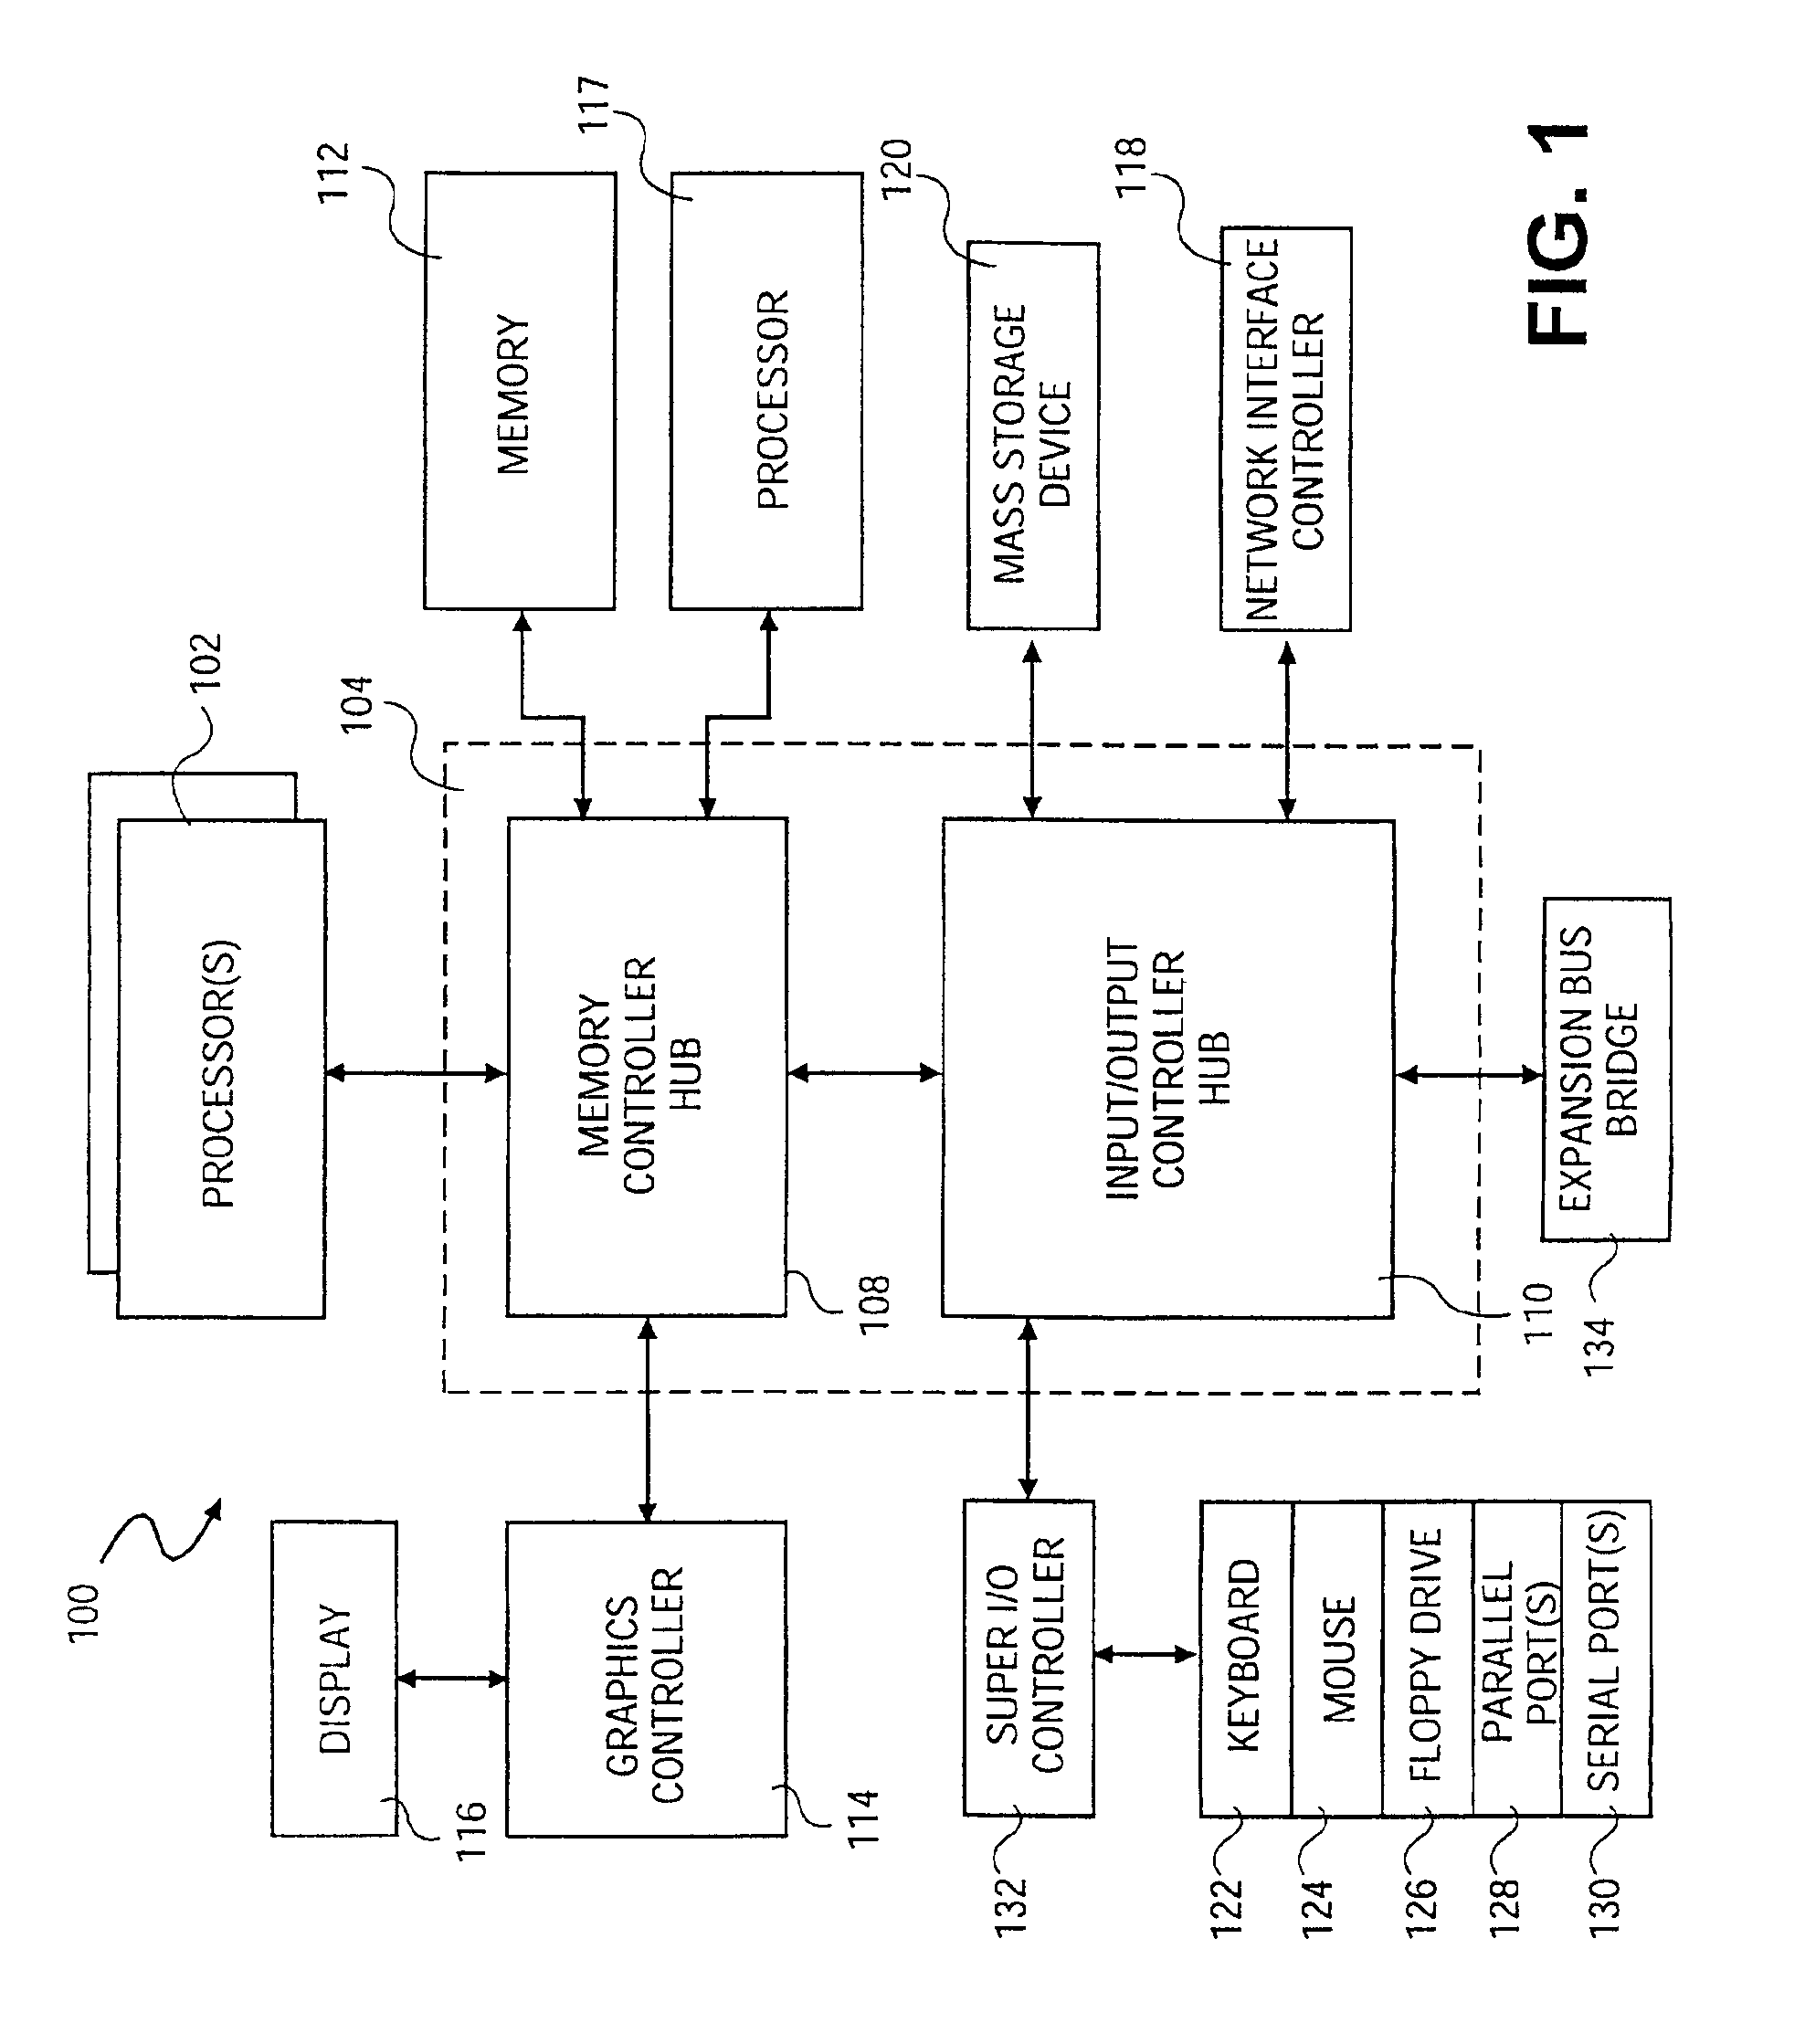 Method and apparatus for performing modular multiplication